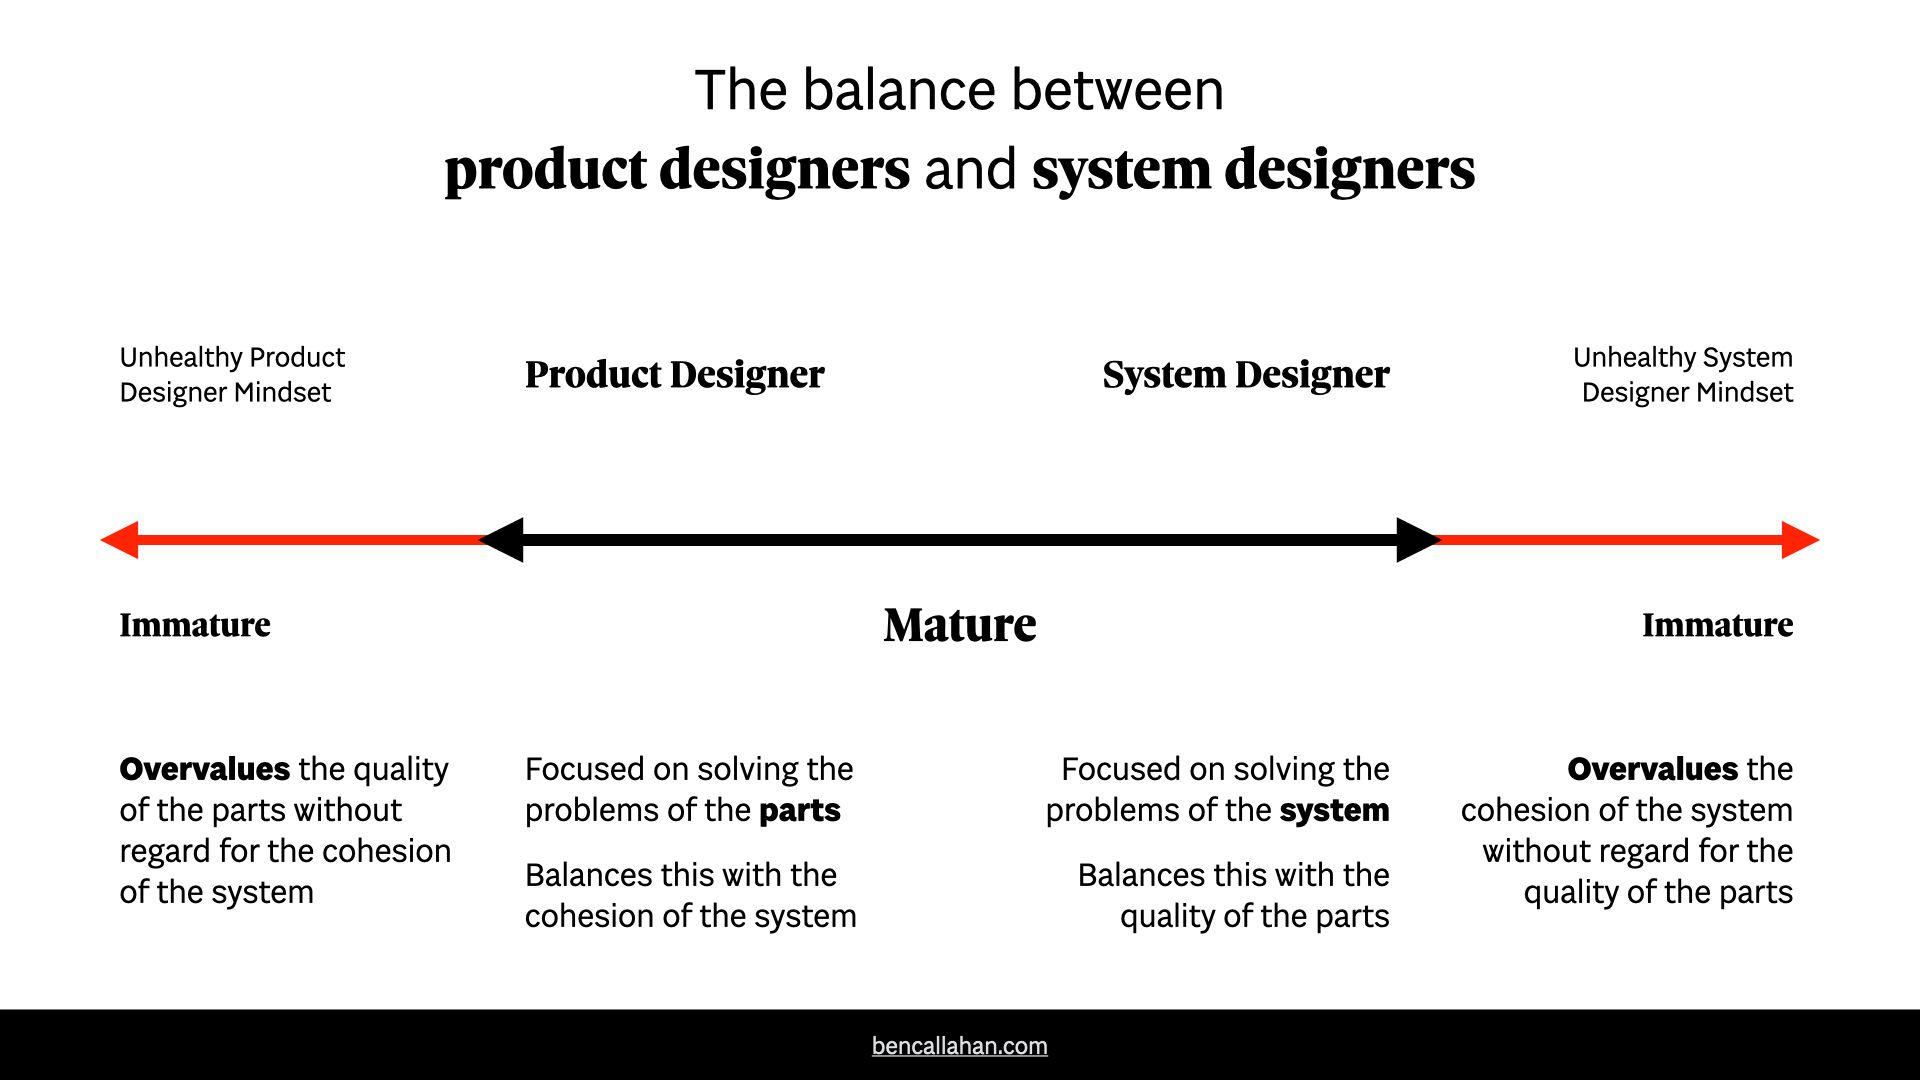 The spectrum of individual designer maturity, from an unhealthy product designer mindset on the far left, to a healthy product designer mindset left of center, to a healthy system designer mindset right of center, to an unhealthy system designer mindset on the far right.